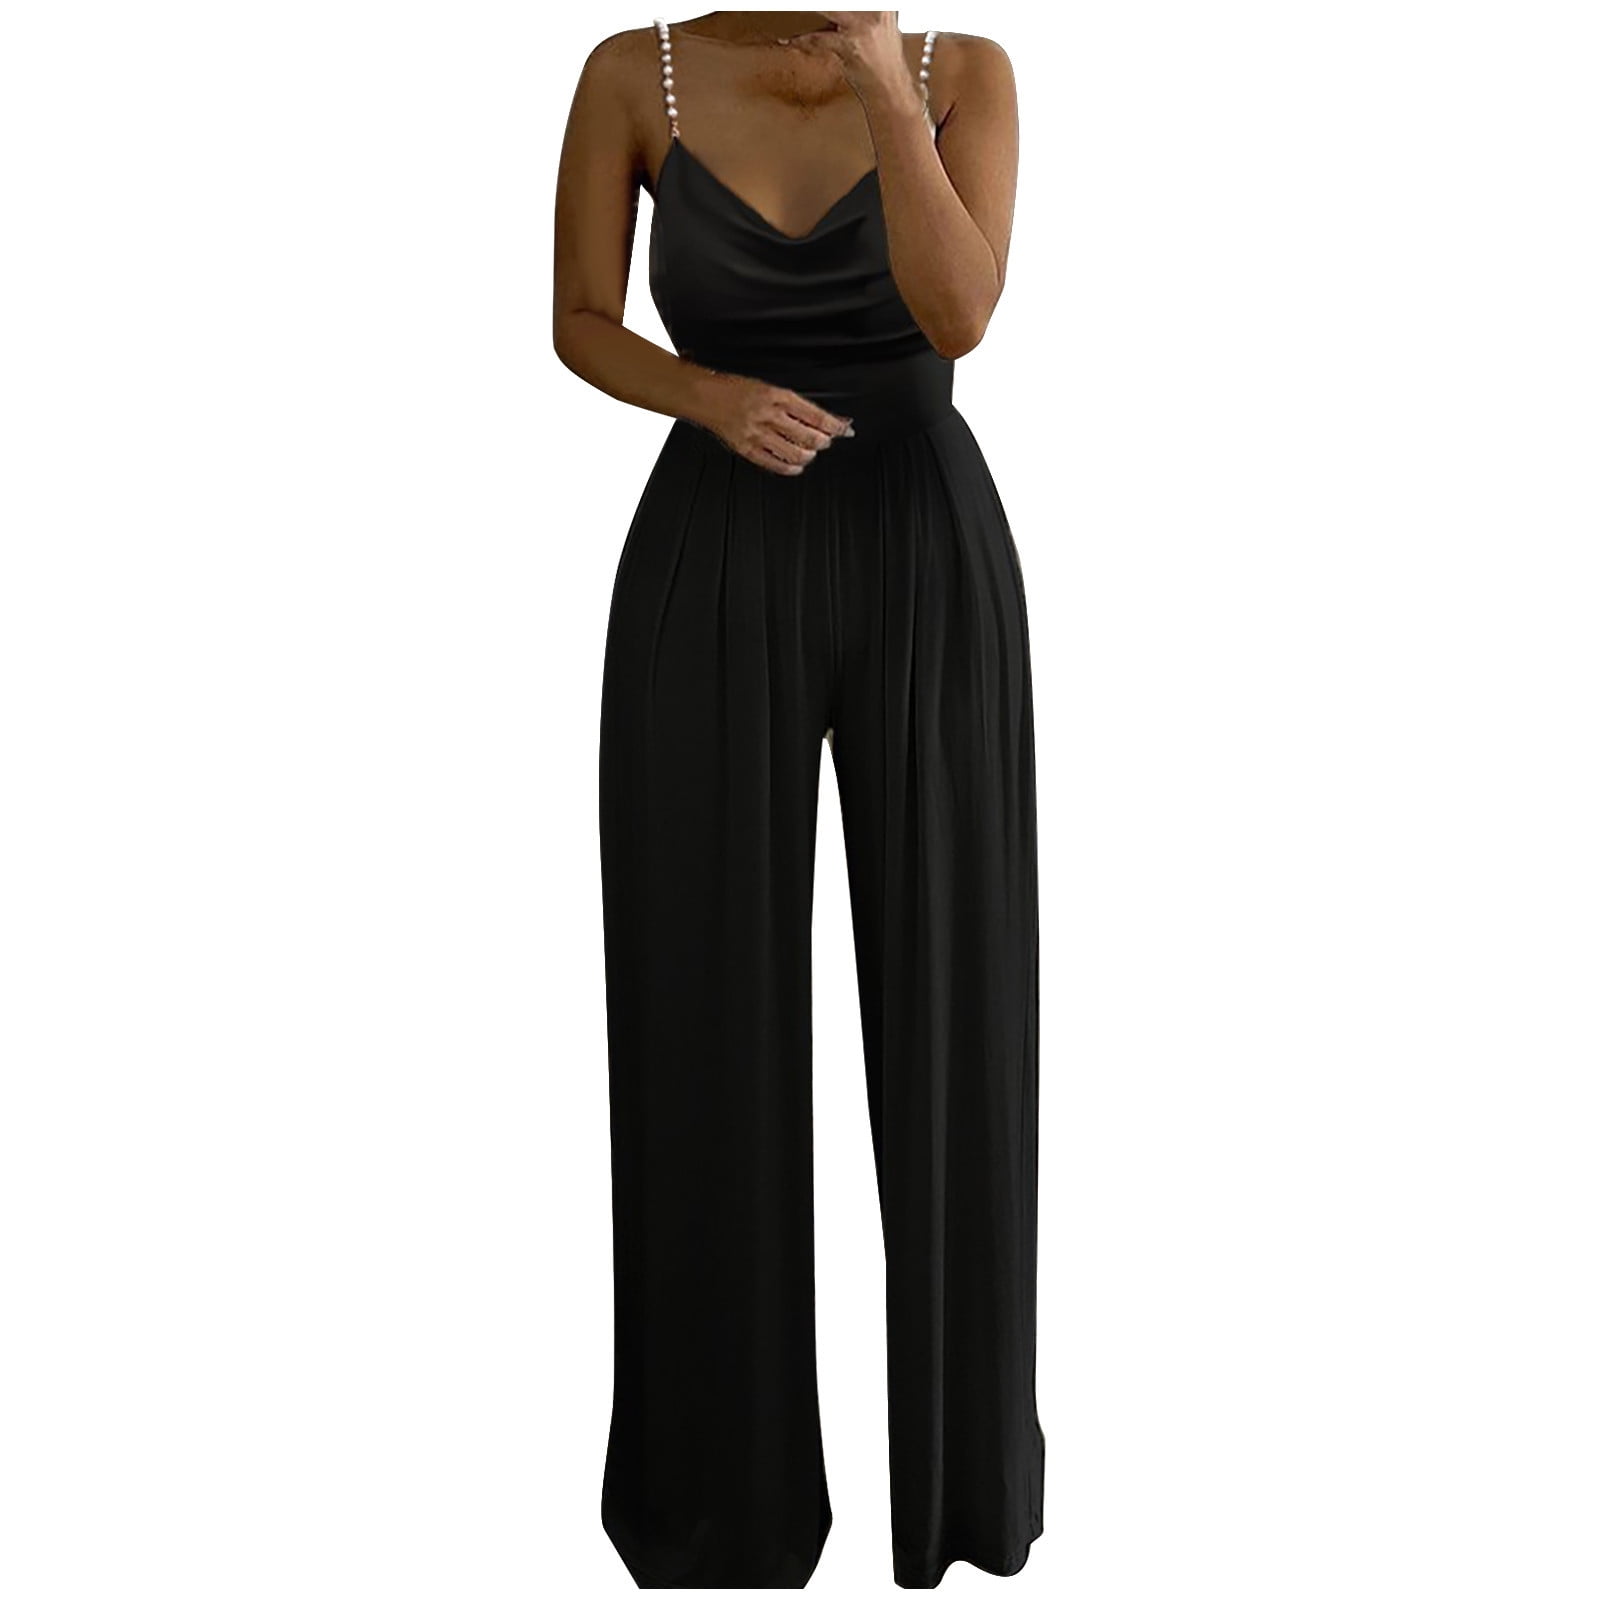 Scyoekwg Formal Jumpsuit for Women Evening Party Casual Solid Color Long  Playsuit Loose Lady Pearl Suspender Jumpsuit Black XL (10)